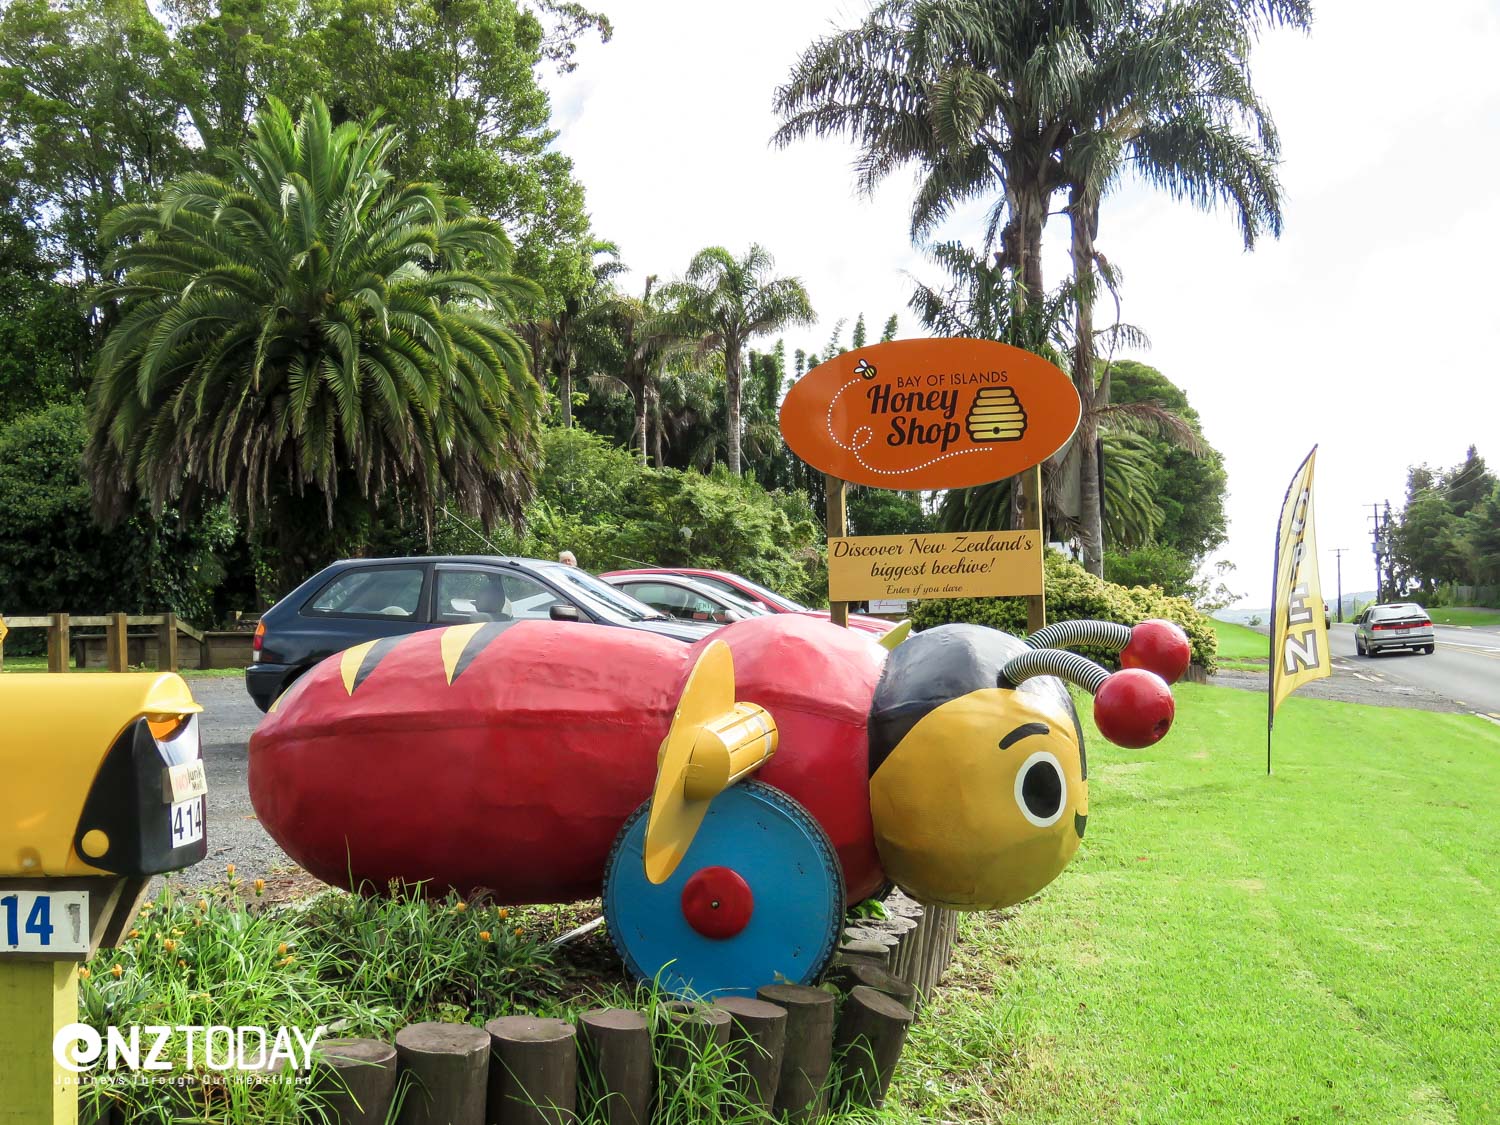 Iconic Buzzy Bee at the entrance to Bay of Islands Honey Shop